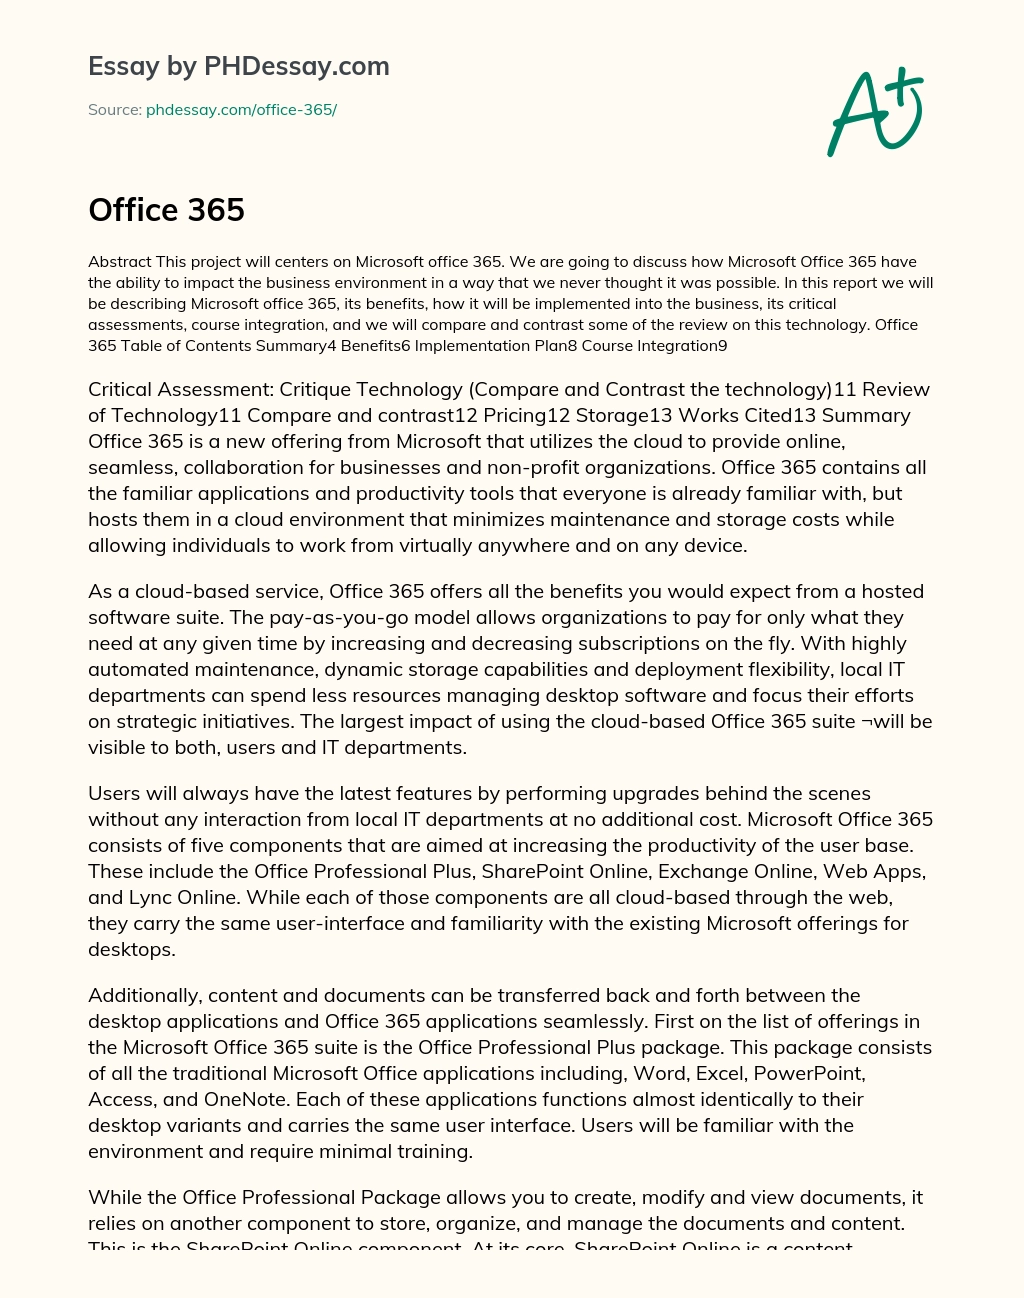 Microsoft Office 365: Benefits and Implementation for Businesses essay